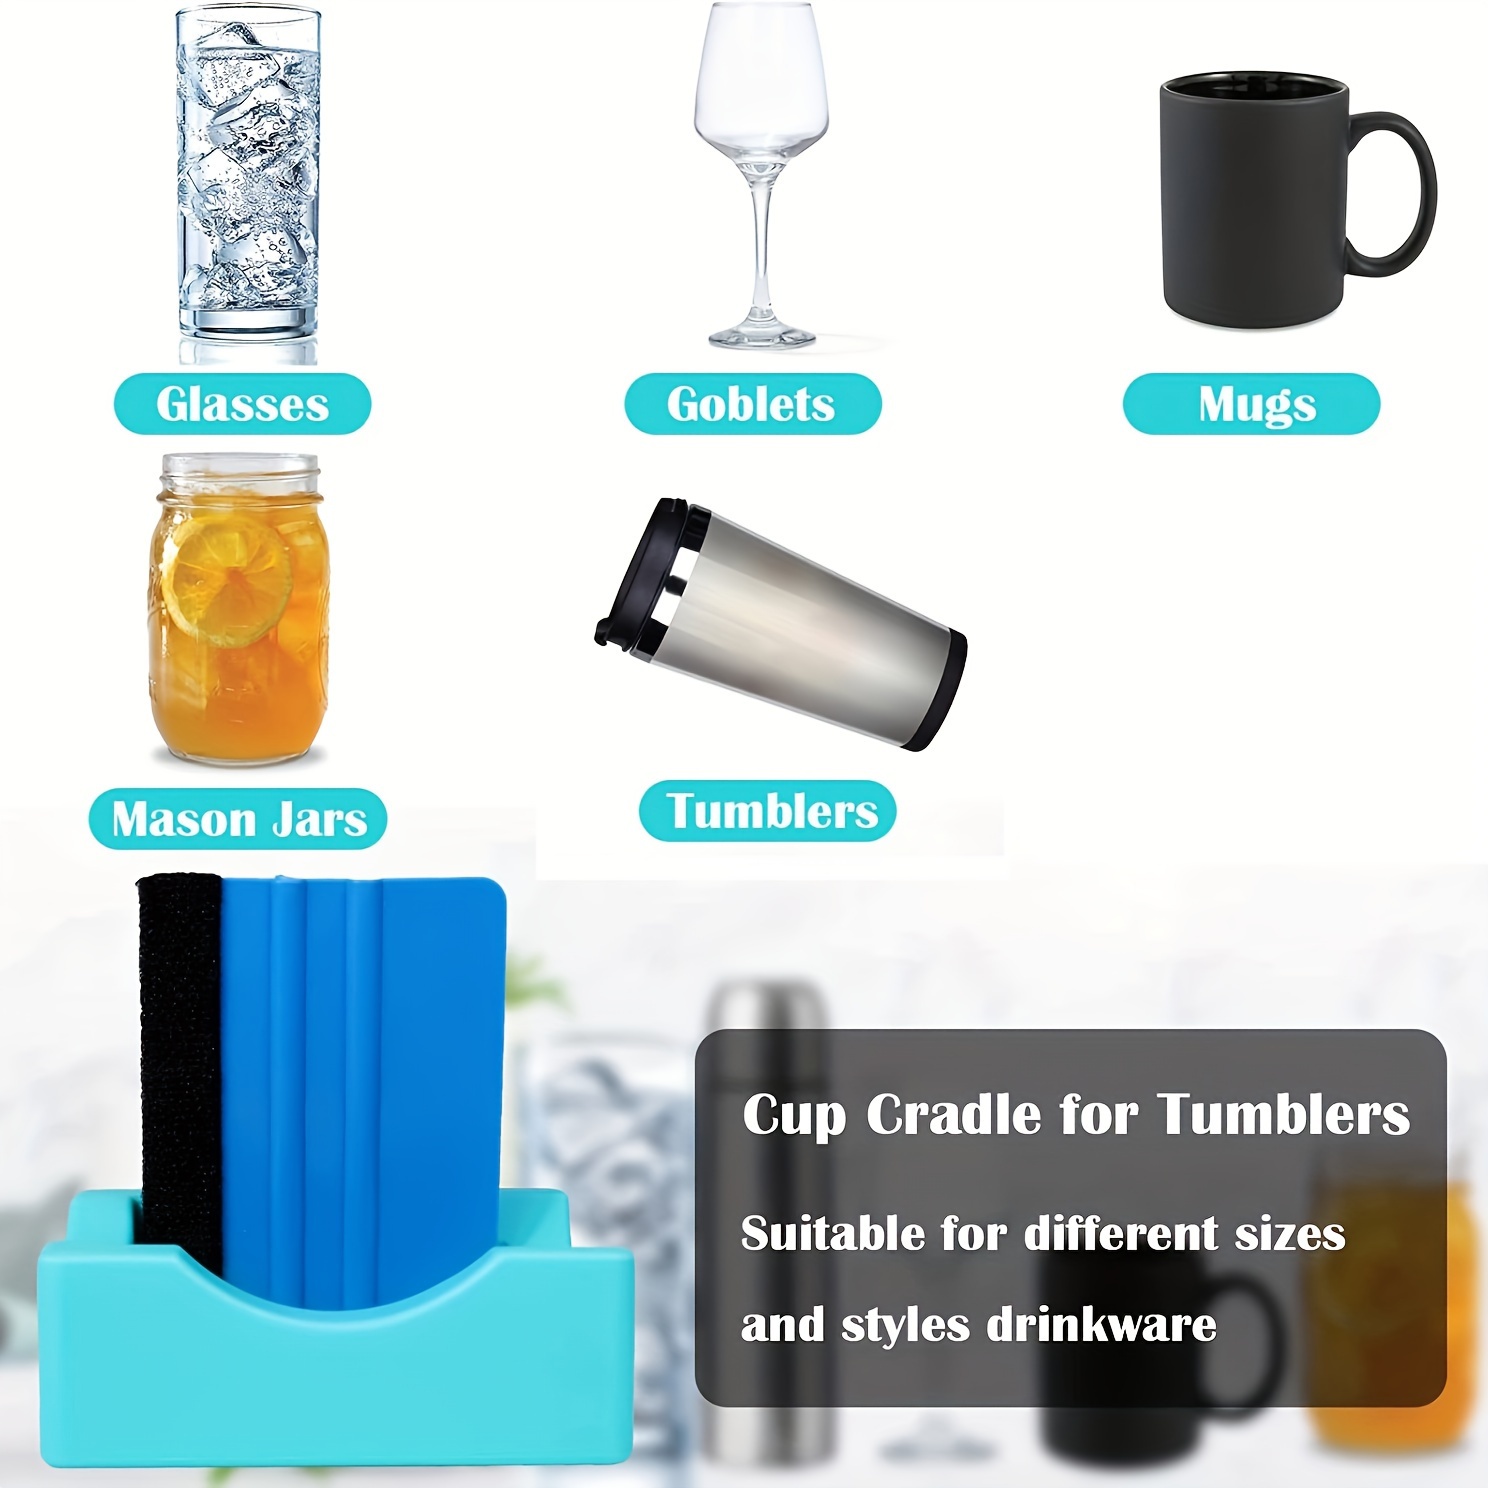 Mug Glass Cup Cradle Silicone Cup Holder With Builts-In Slot